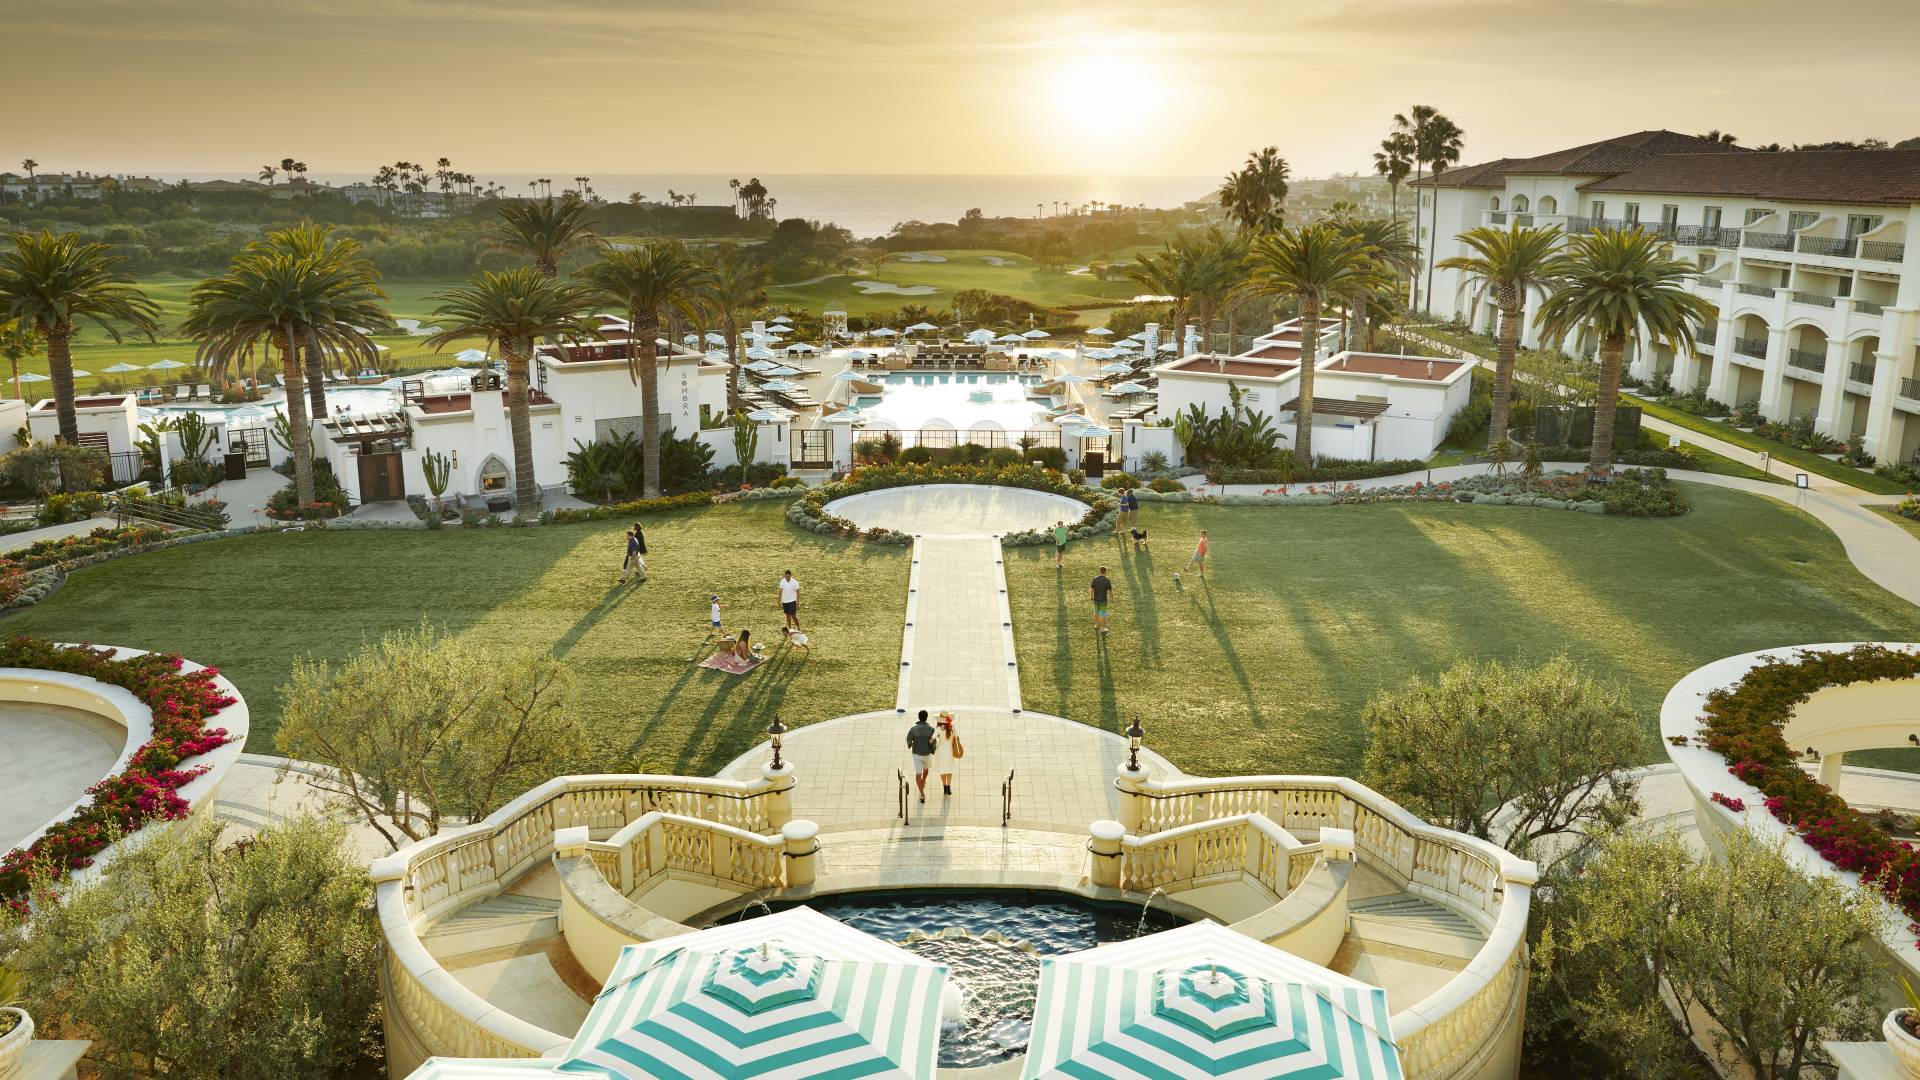 aerial view of hotel exterior and grounds with pools, view of golf course, and people walking